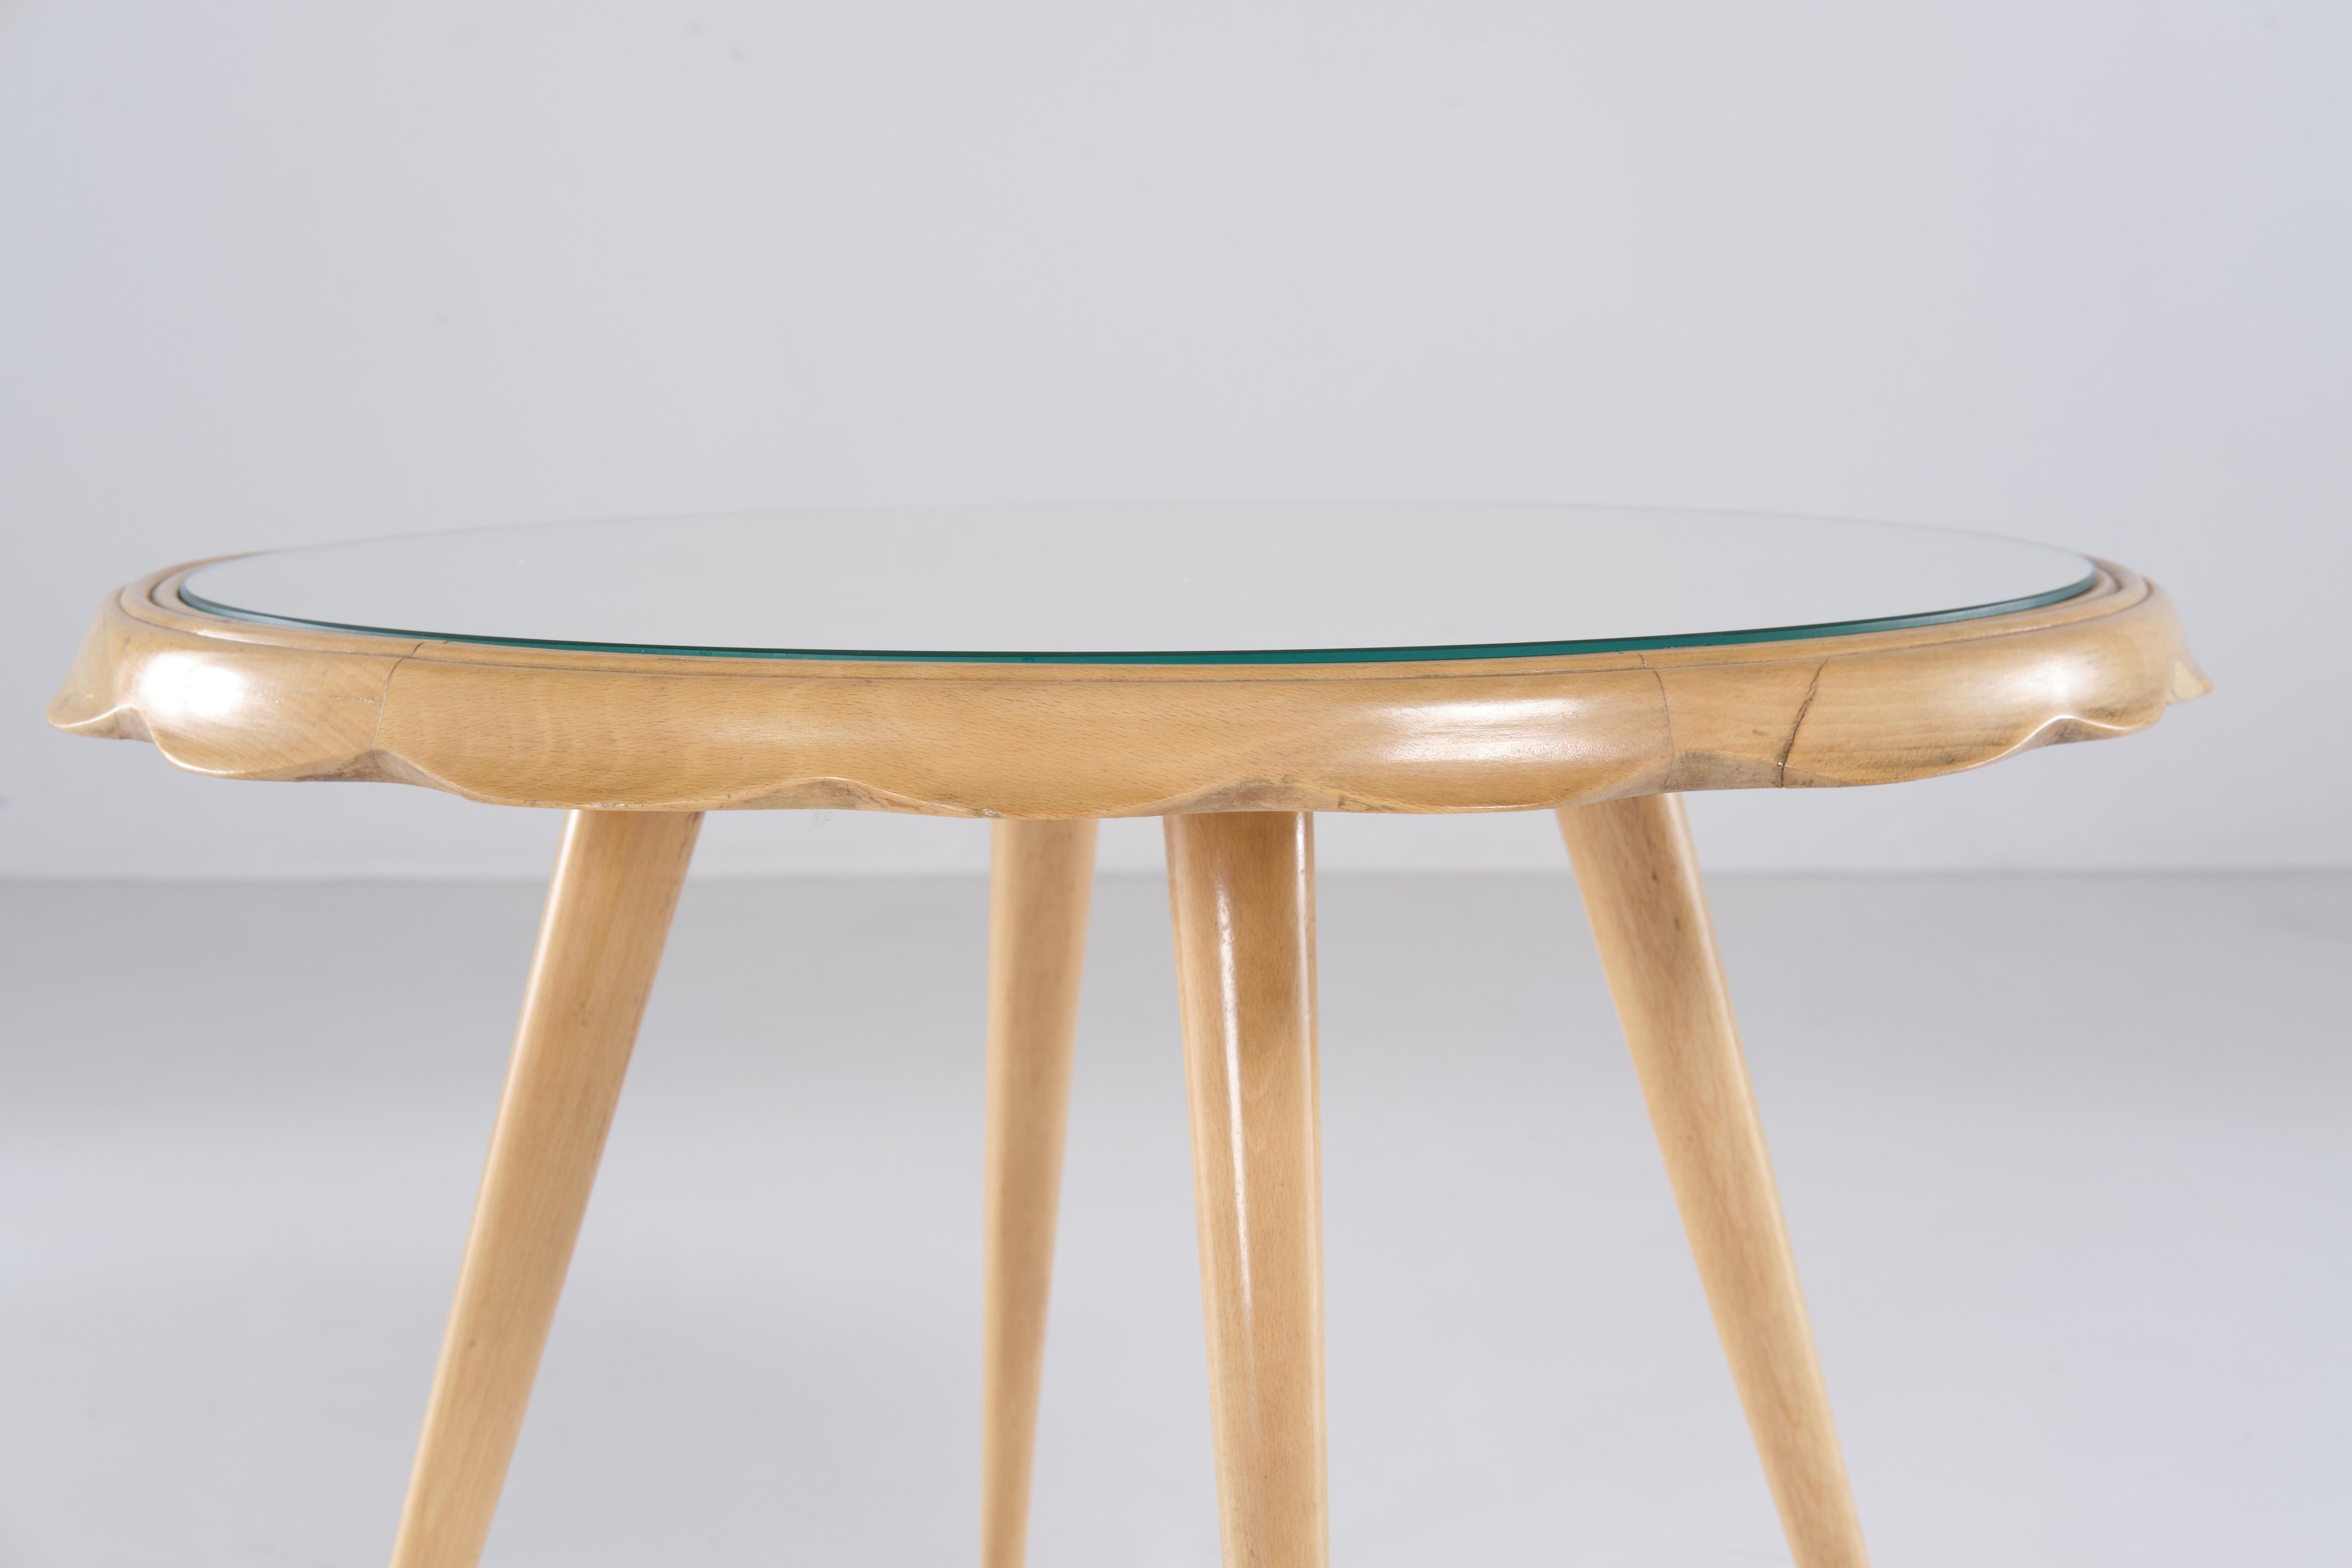 One Wood and Mirrored Glass Low Table, Italian Design, 1950 circa For Sale 1